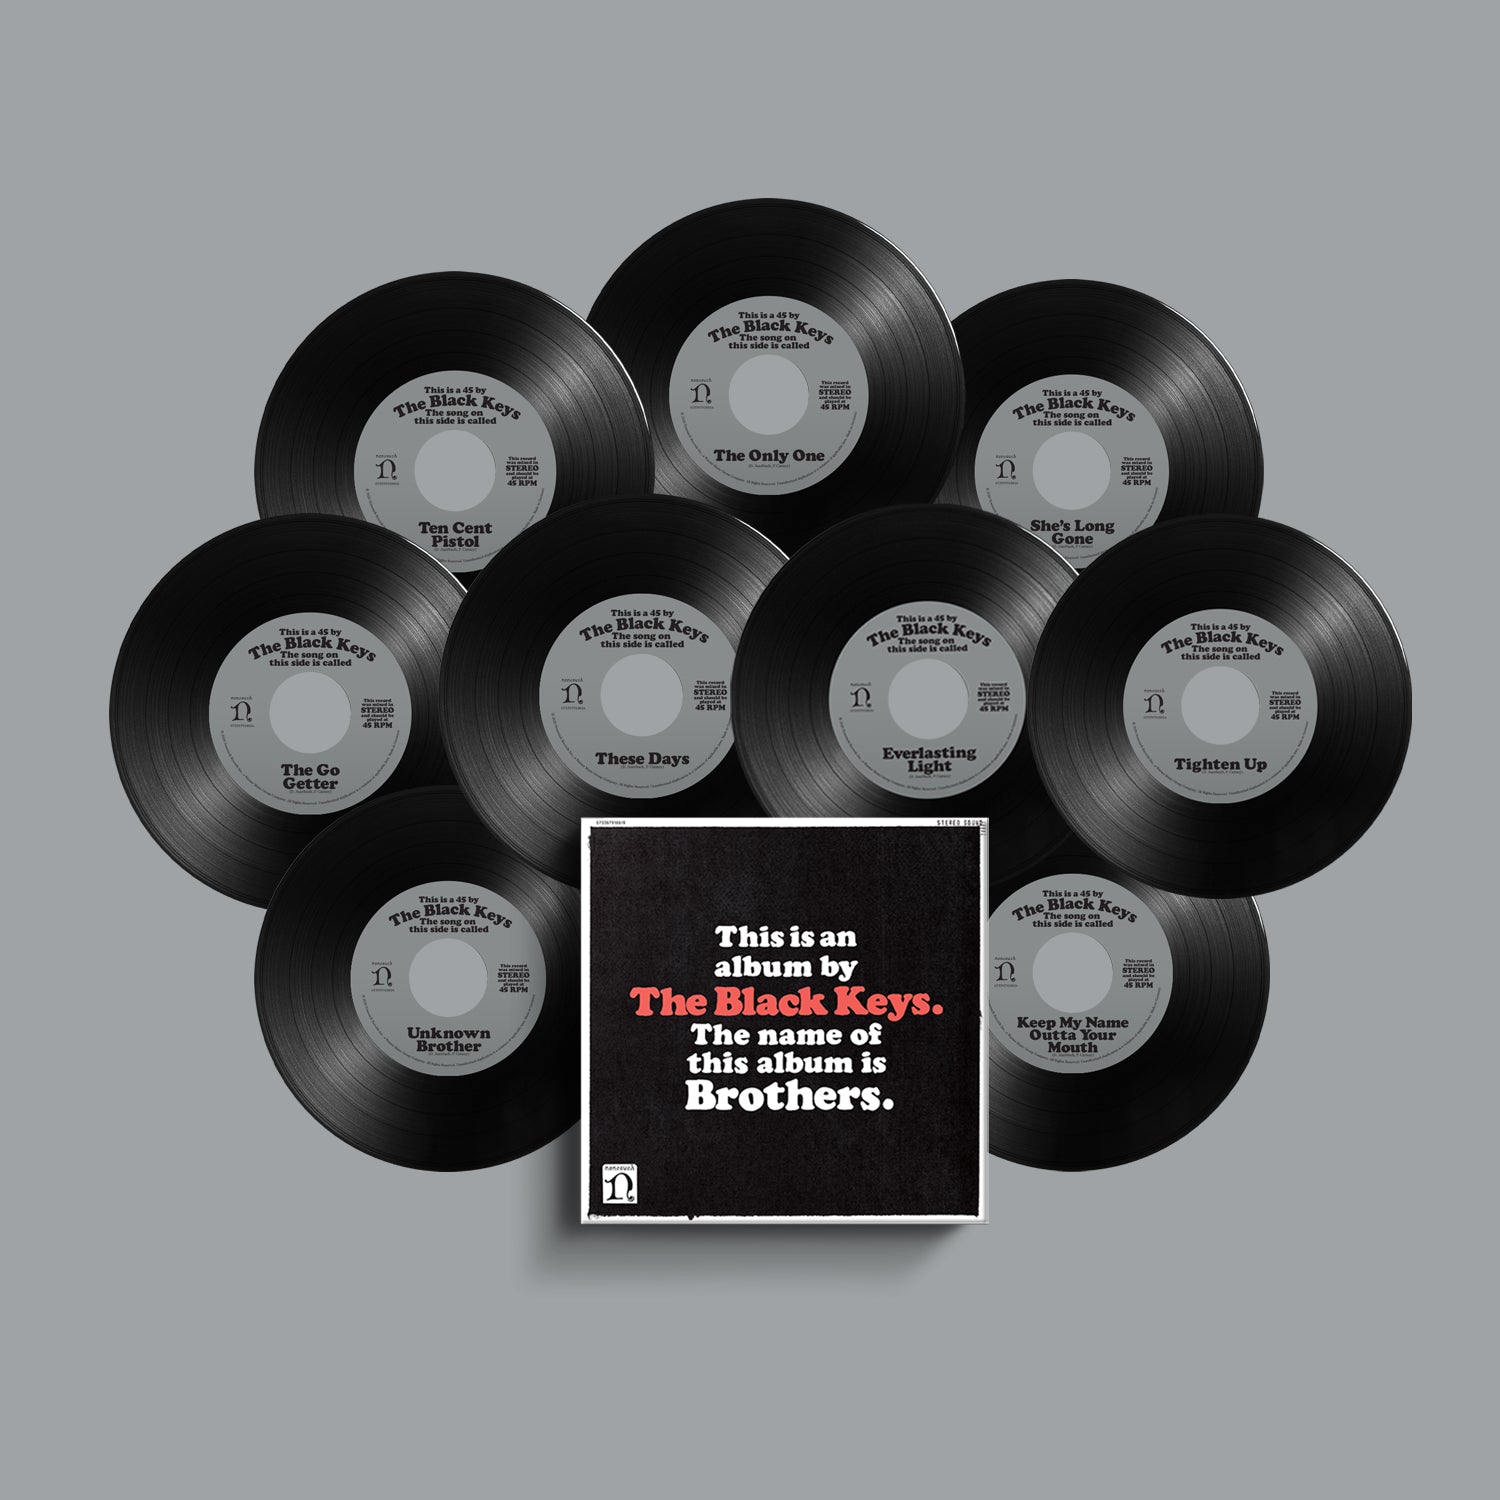 The Black Keys - Brothers (Deluxe Remastered Anniversary Edition): Vinyl 9x7" Box Set